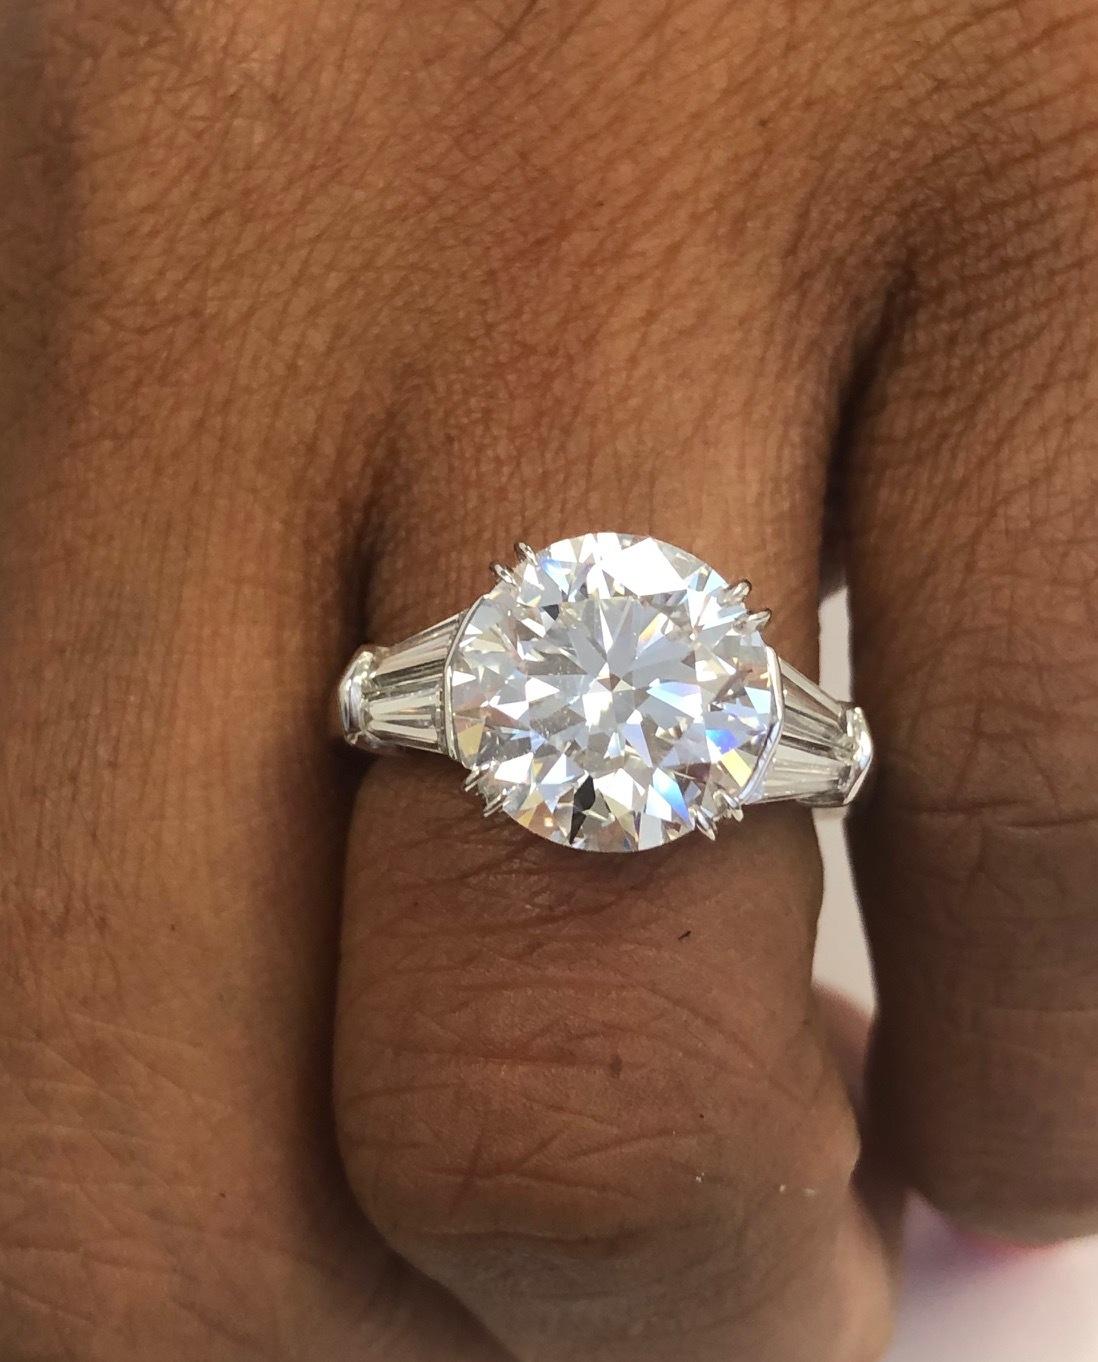 This fabulous handmade Platinum Ring for the very special center Diamond of 5.02 carats with a GIA report, EVS1, X,X,VG,N
accompanied with a total of four Tapered Baguette Diamonds 1.04 carats.
This is the kind of ring you would only ring in some of